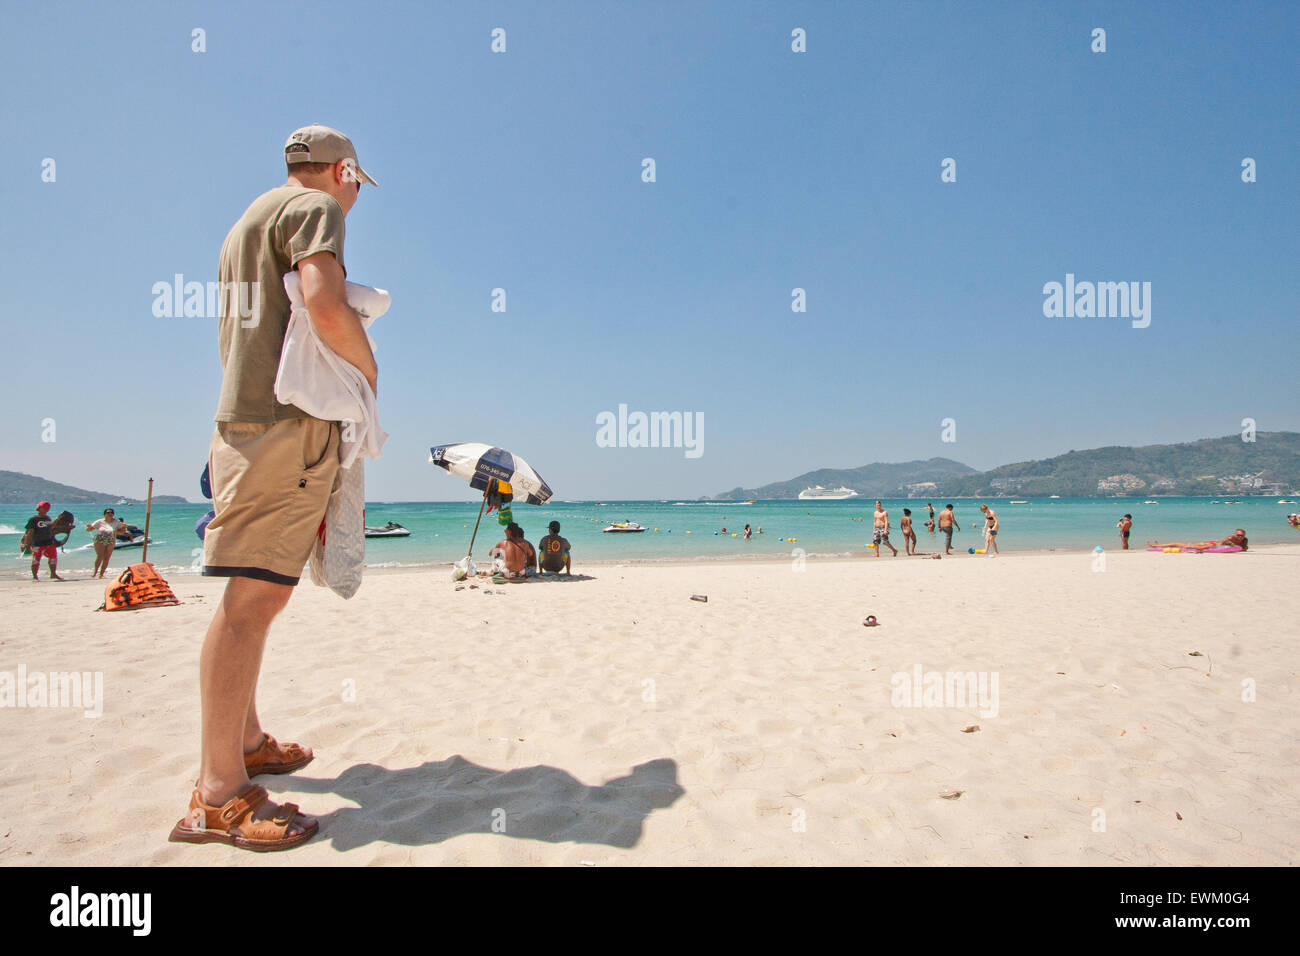 turist on a beach in Thailand, Phuket, Patong, sandals Stock Photo